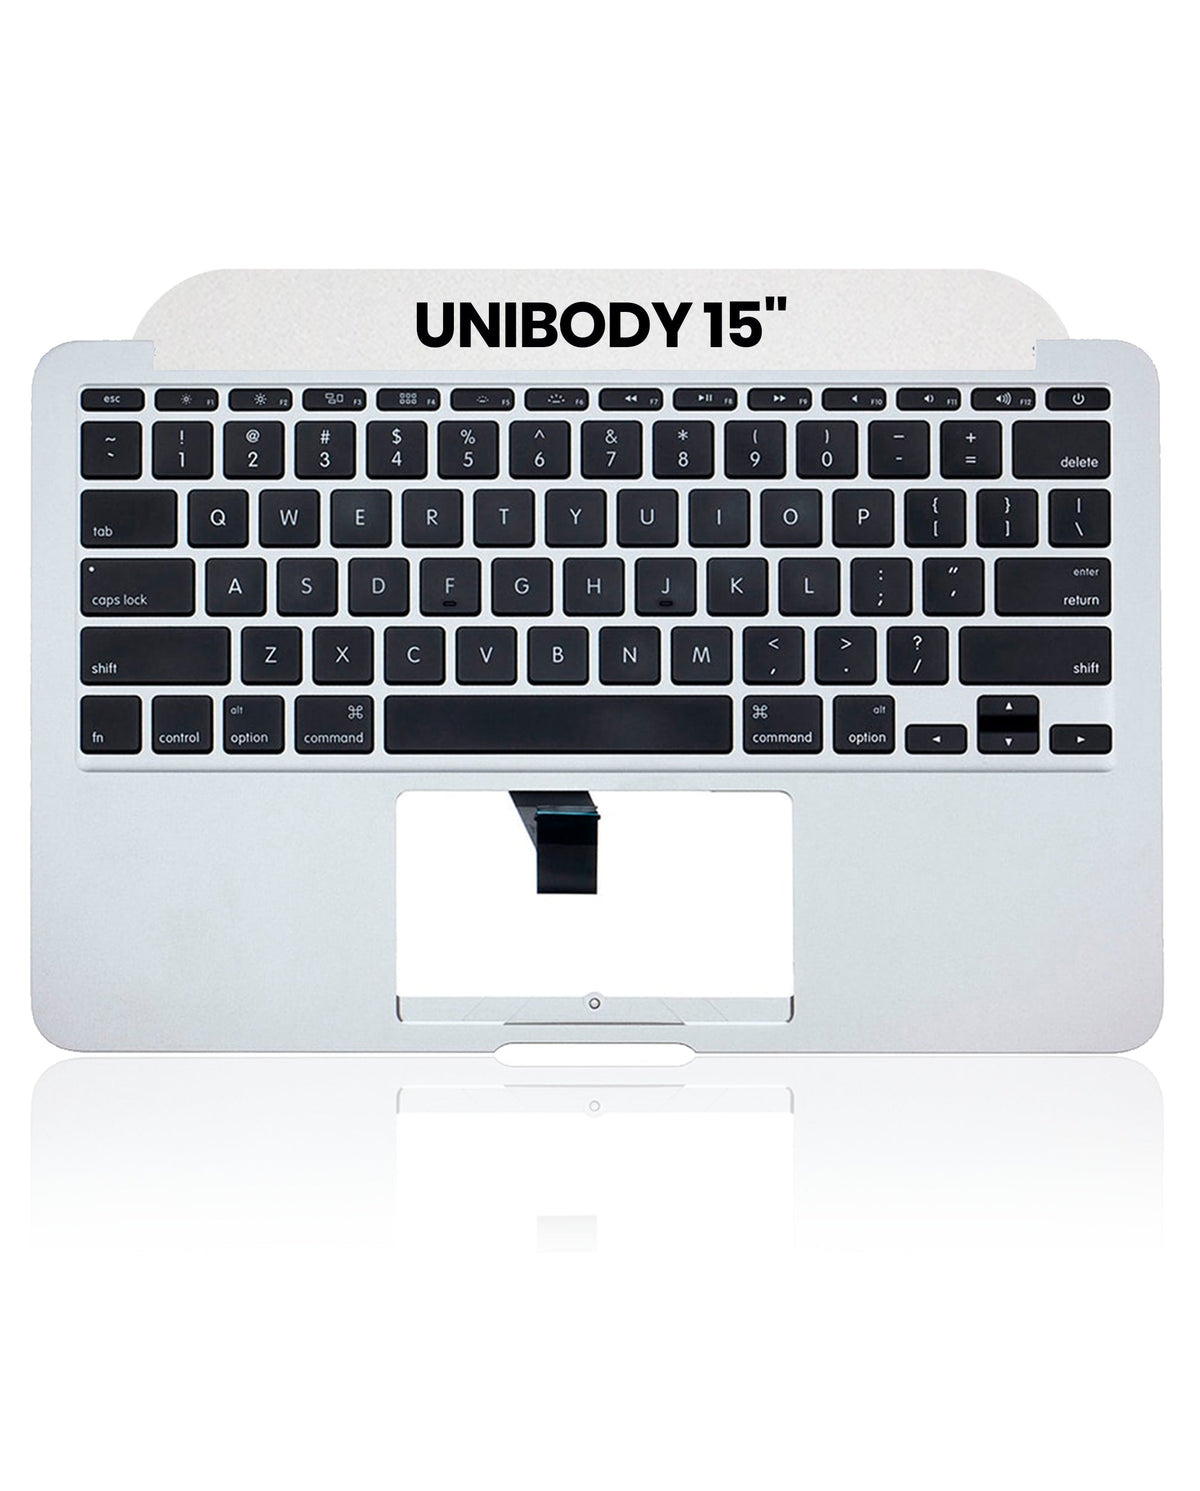 TOP CASE WITH KEYBOARD  (US ENGLISH) FOR MACBOOK PRO UNIBODY 15" A1286 (MID 2010 / EARLY 2011  LATE 2011 / MID 2012) (USED OEM PULL: COSMETIC GRADE: NEW)